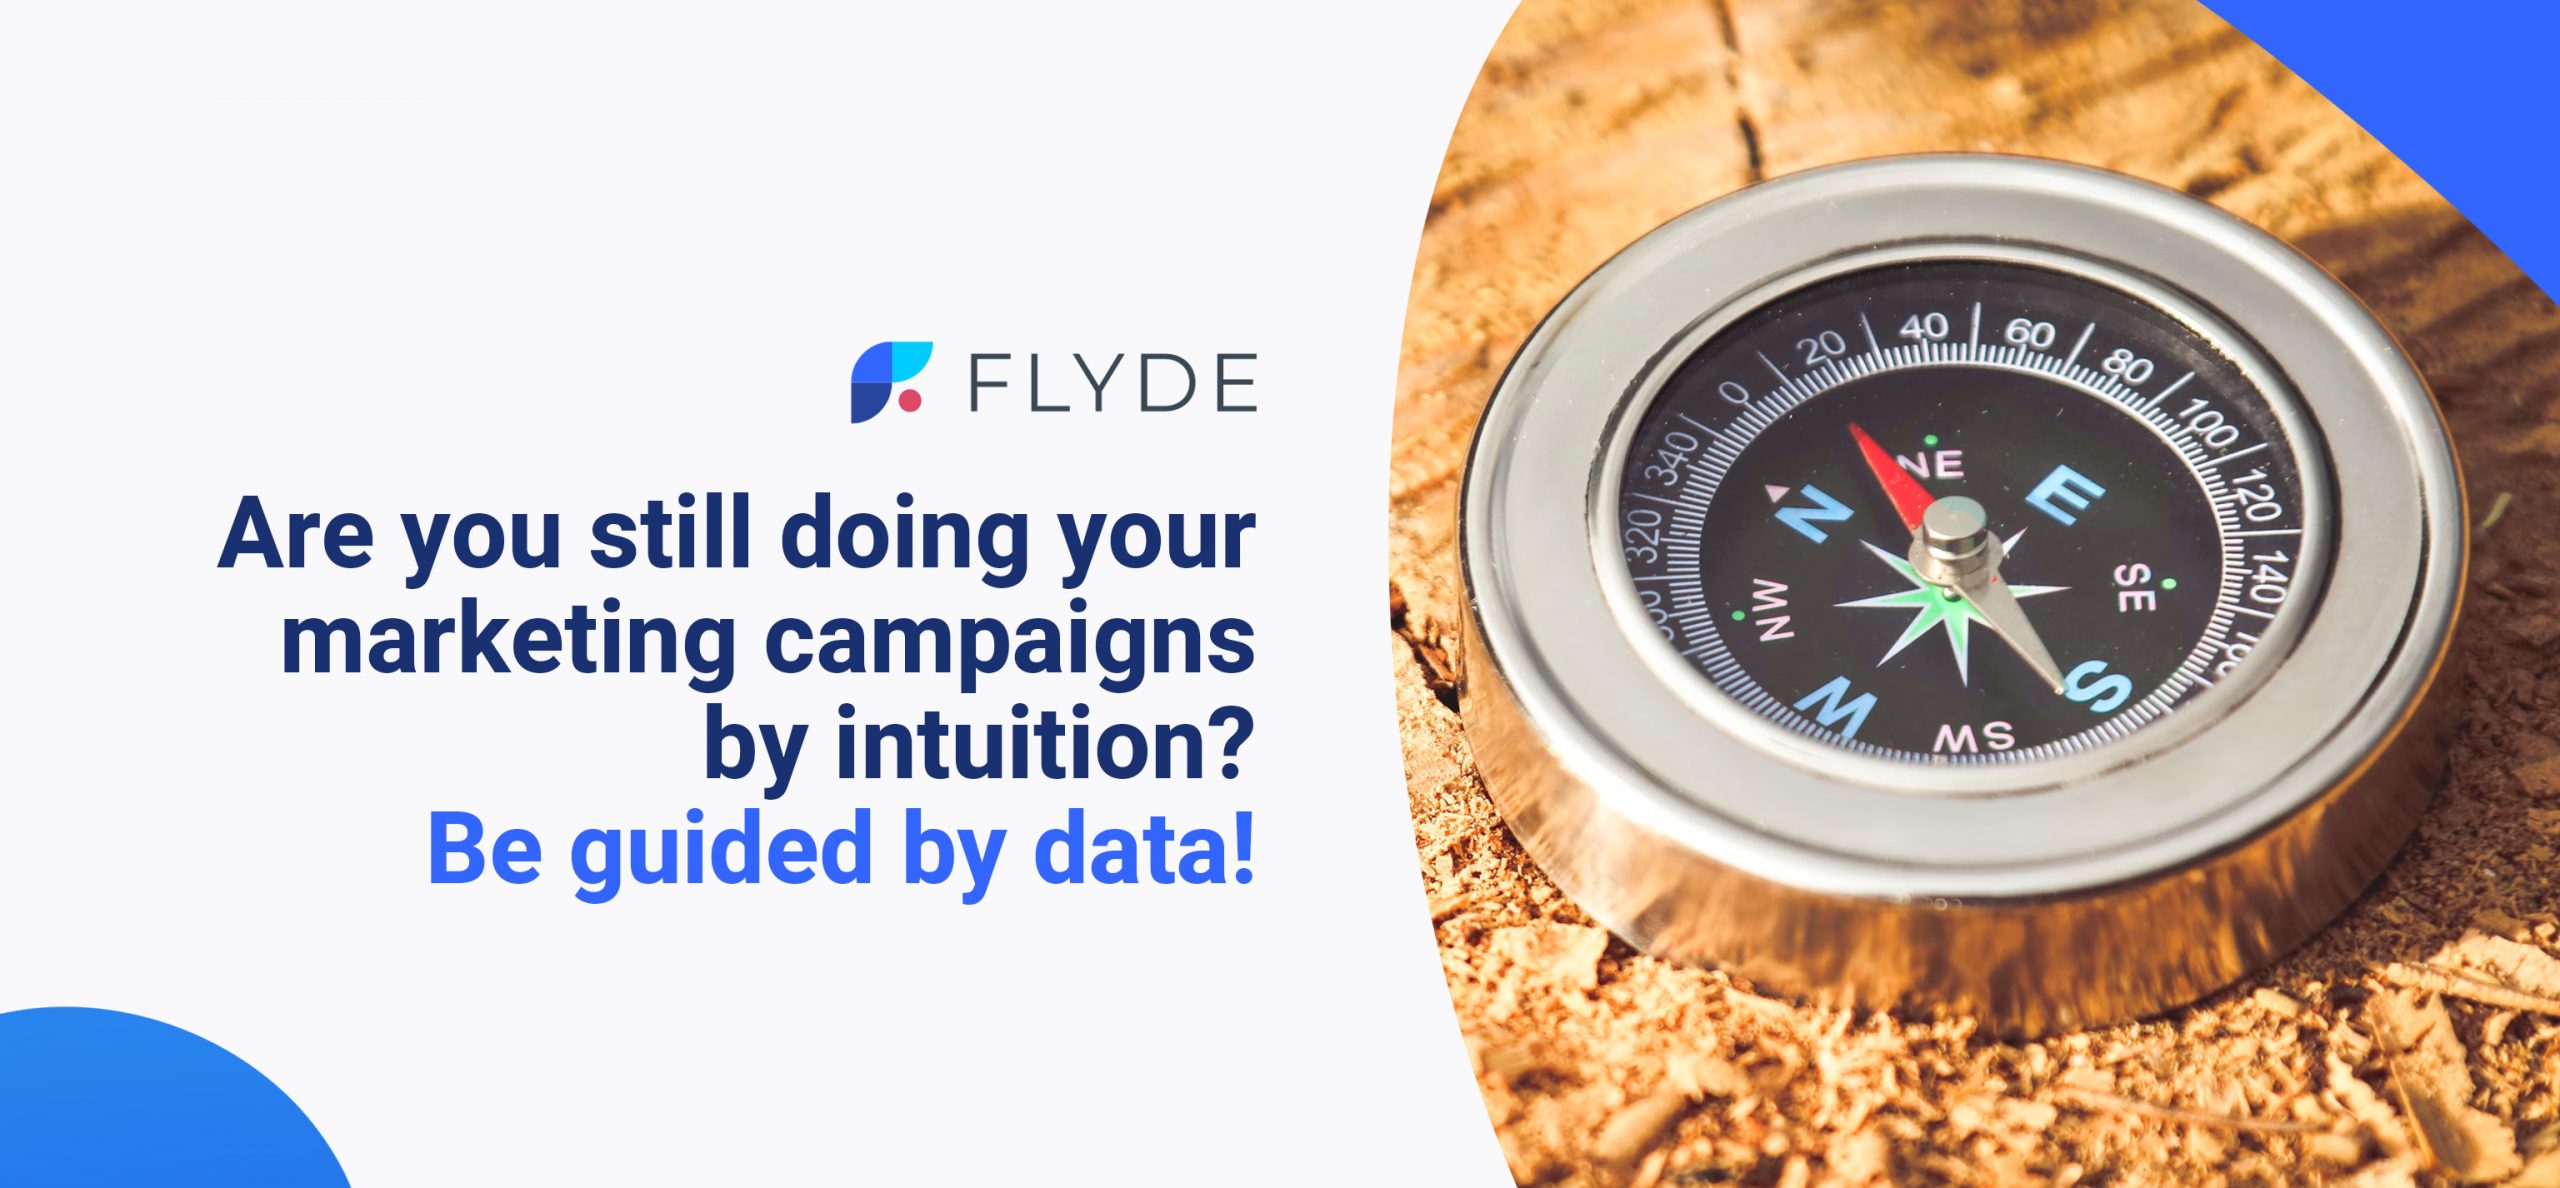 Are you still doing your marketing campaigns by intuition? Be guided by your data!